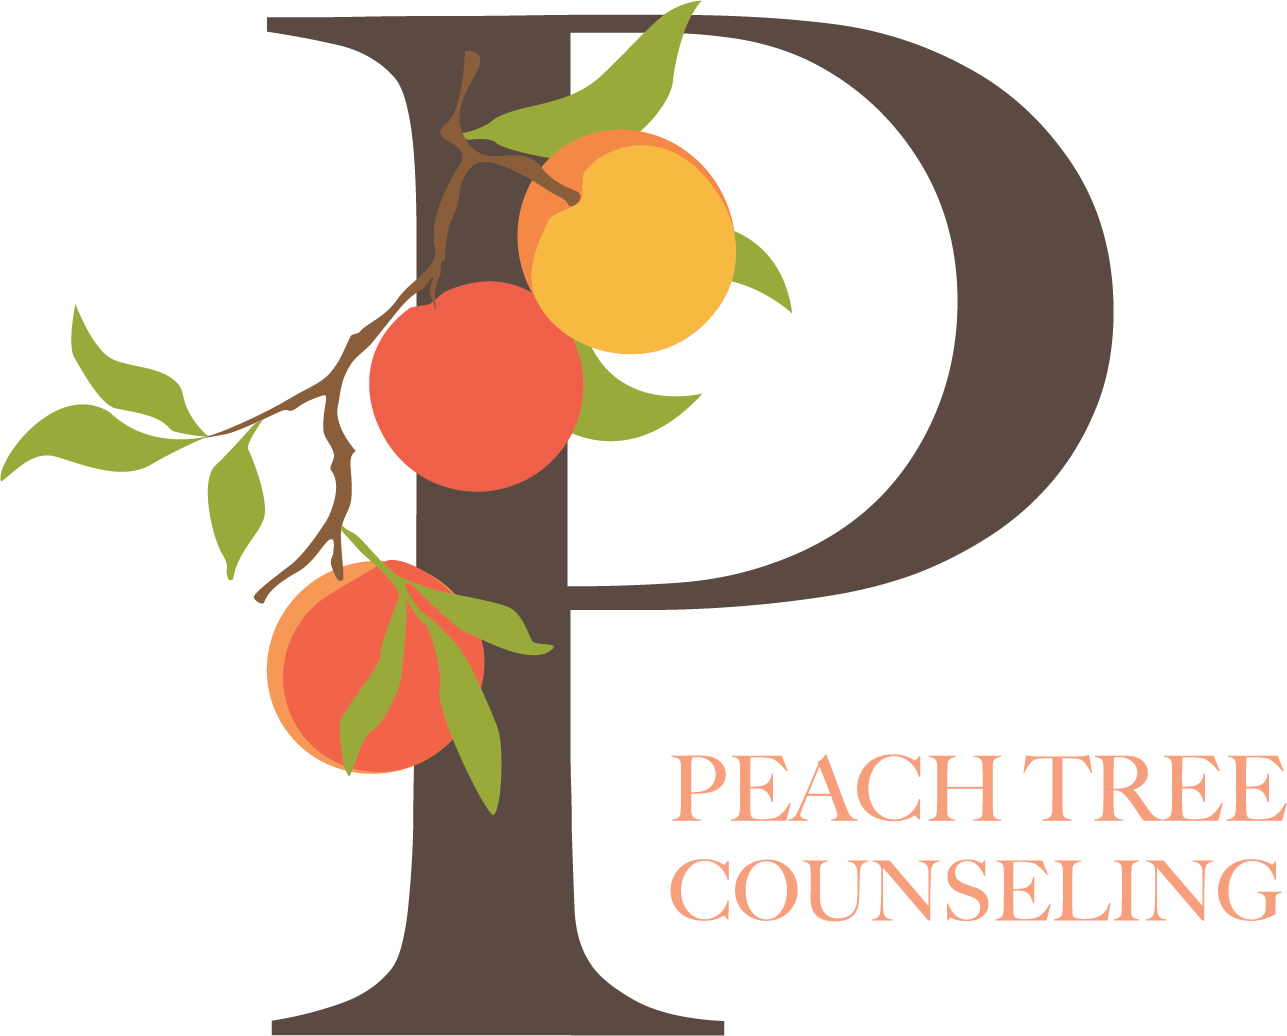 Peachtree Counseling Logo.